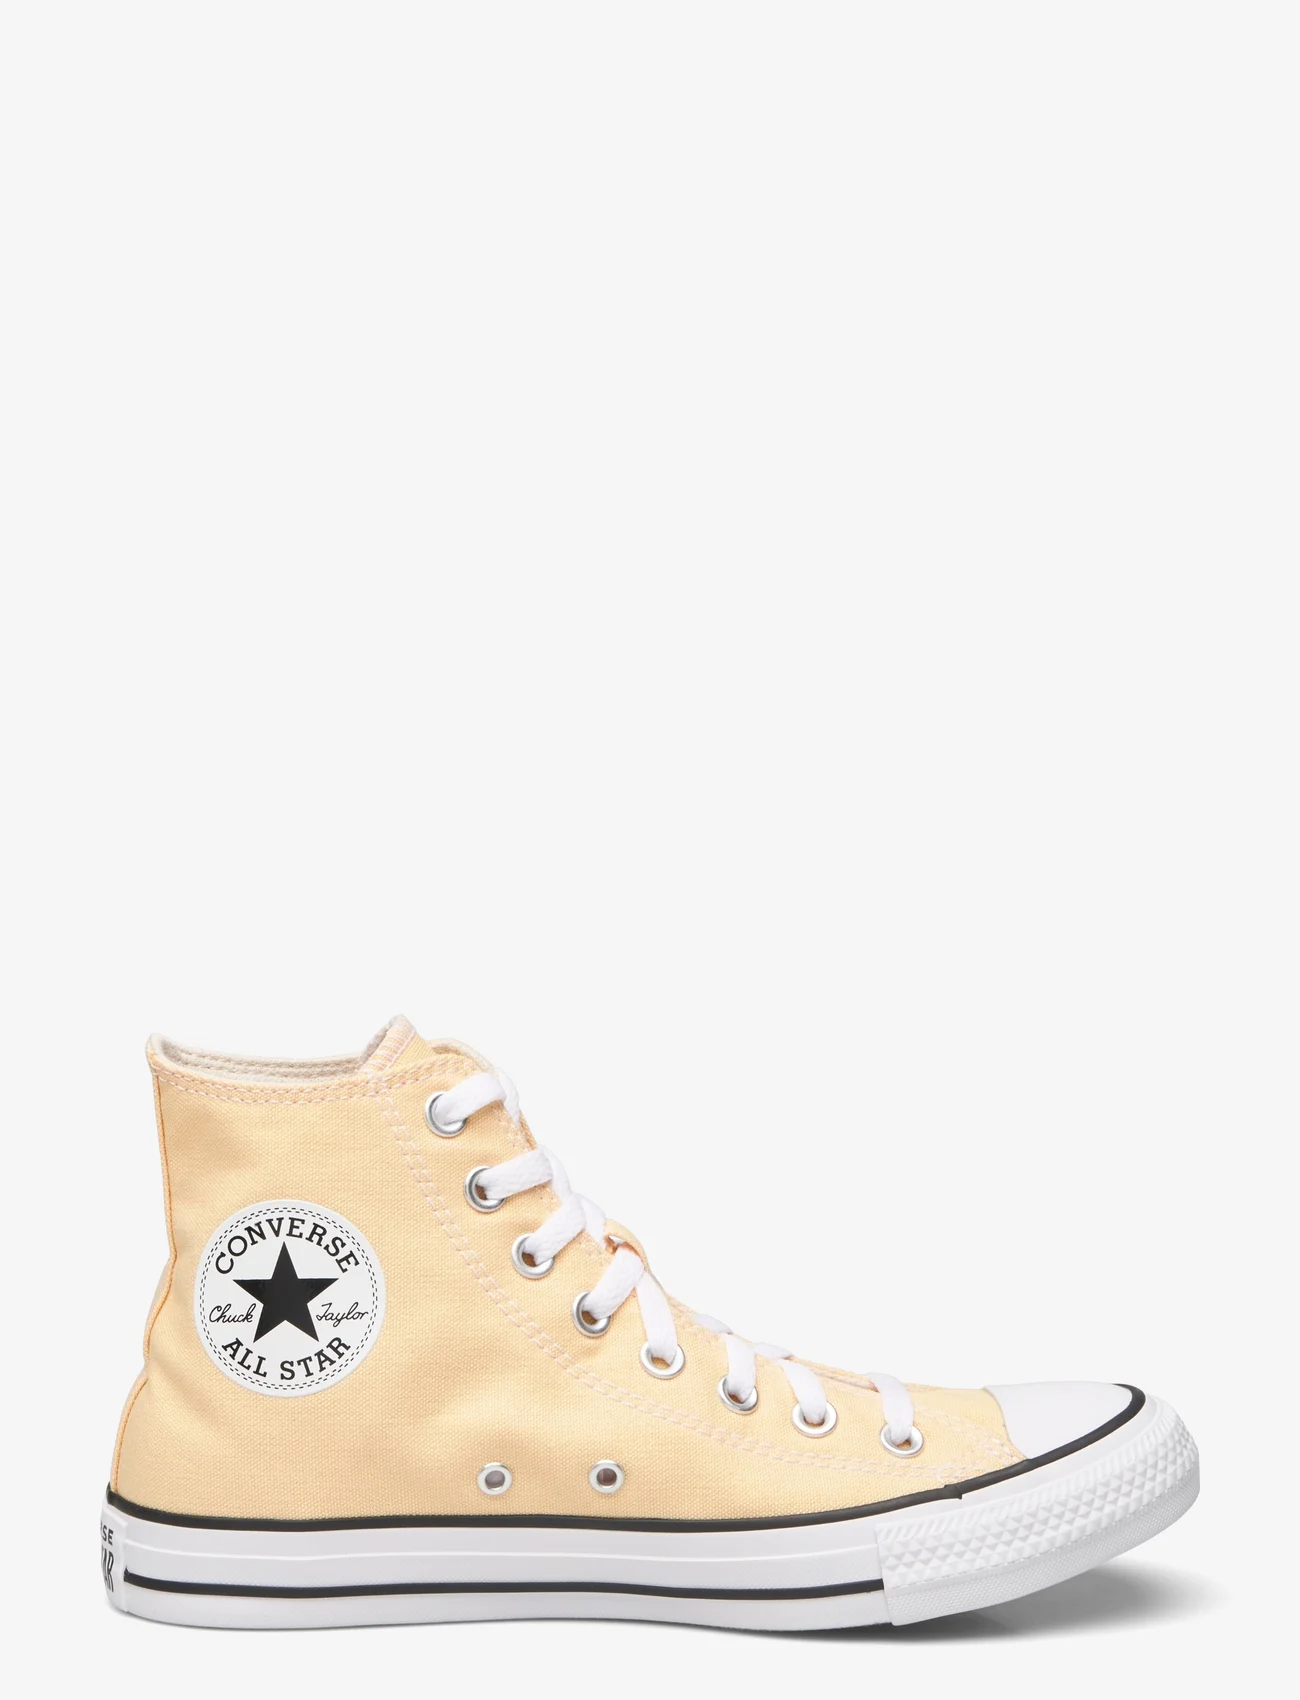 Converse - Chuck Taylor All Star - sneakers med høy ankel - afternoon sun - 1